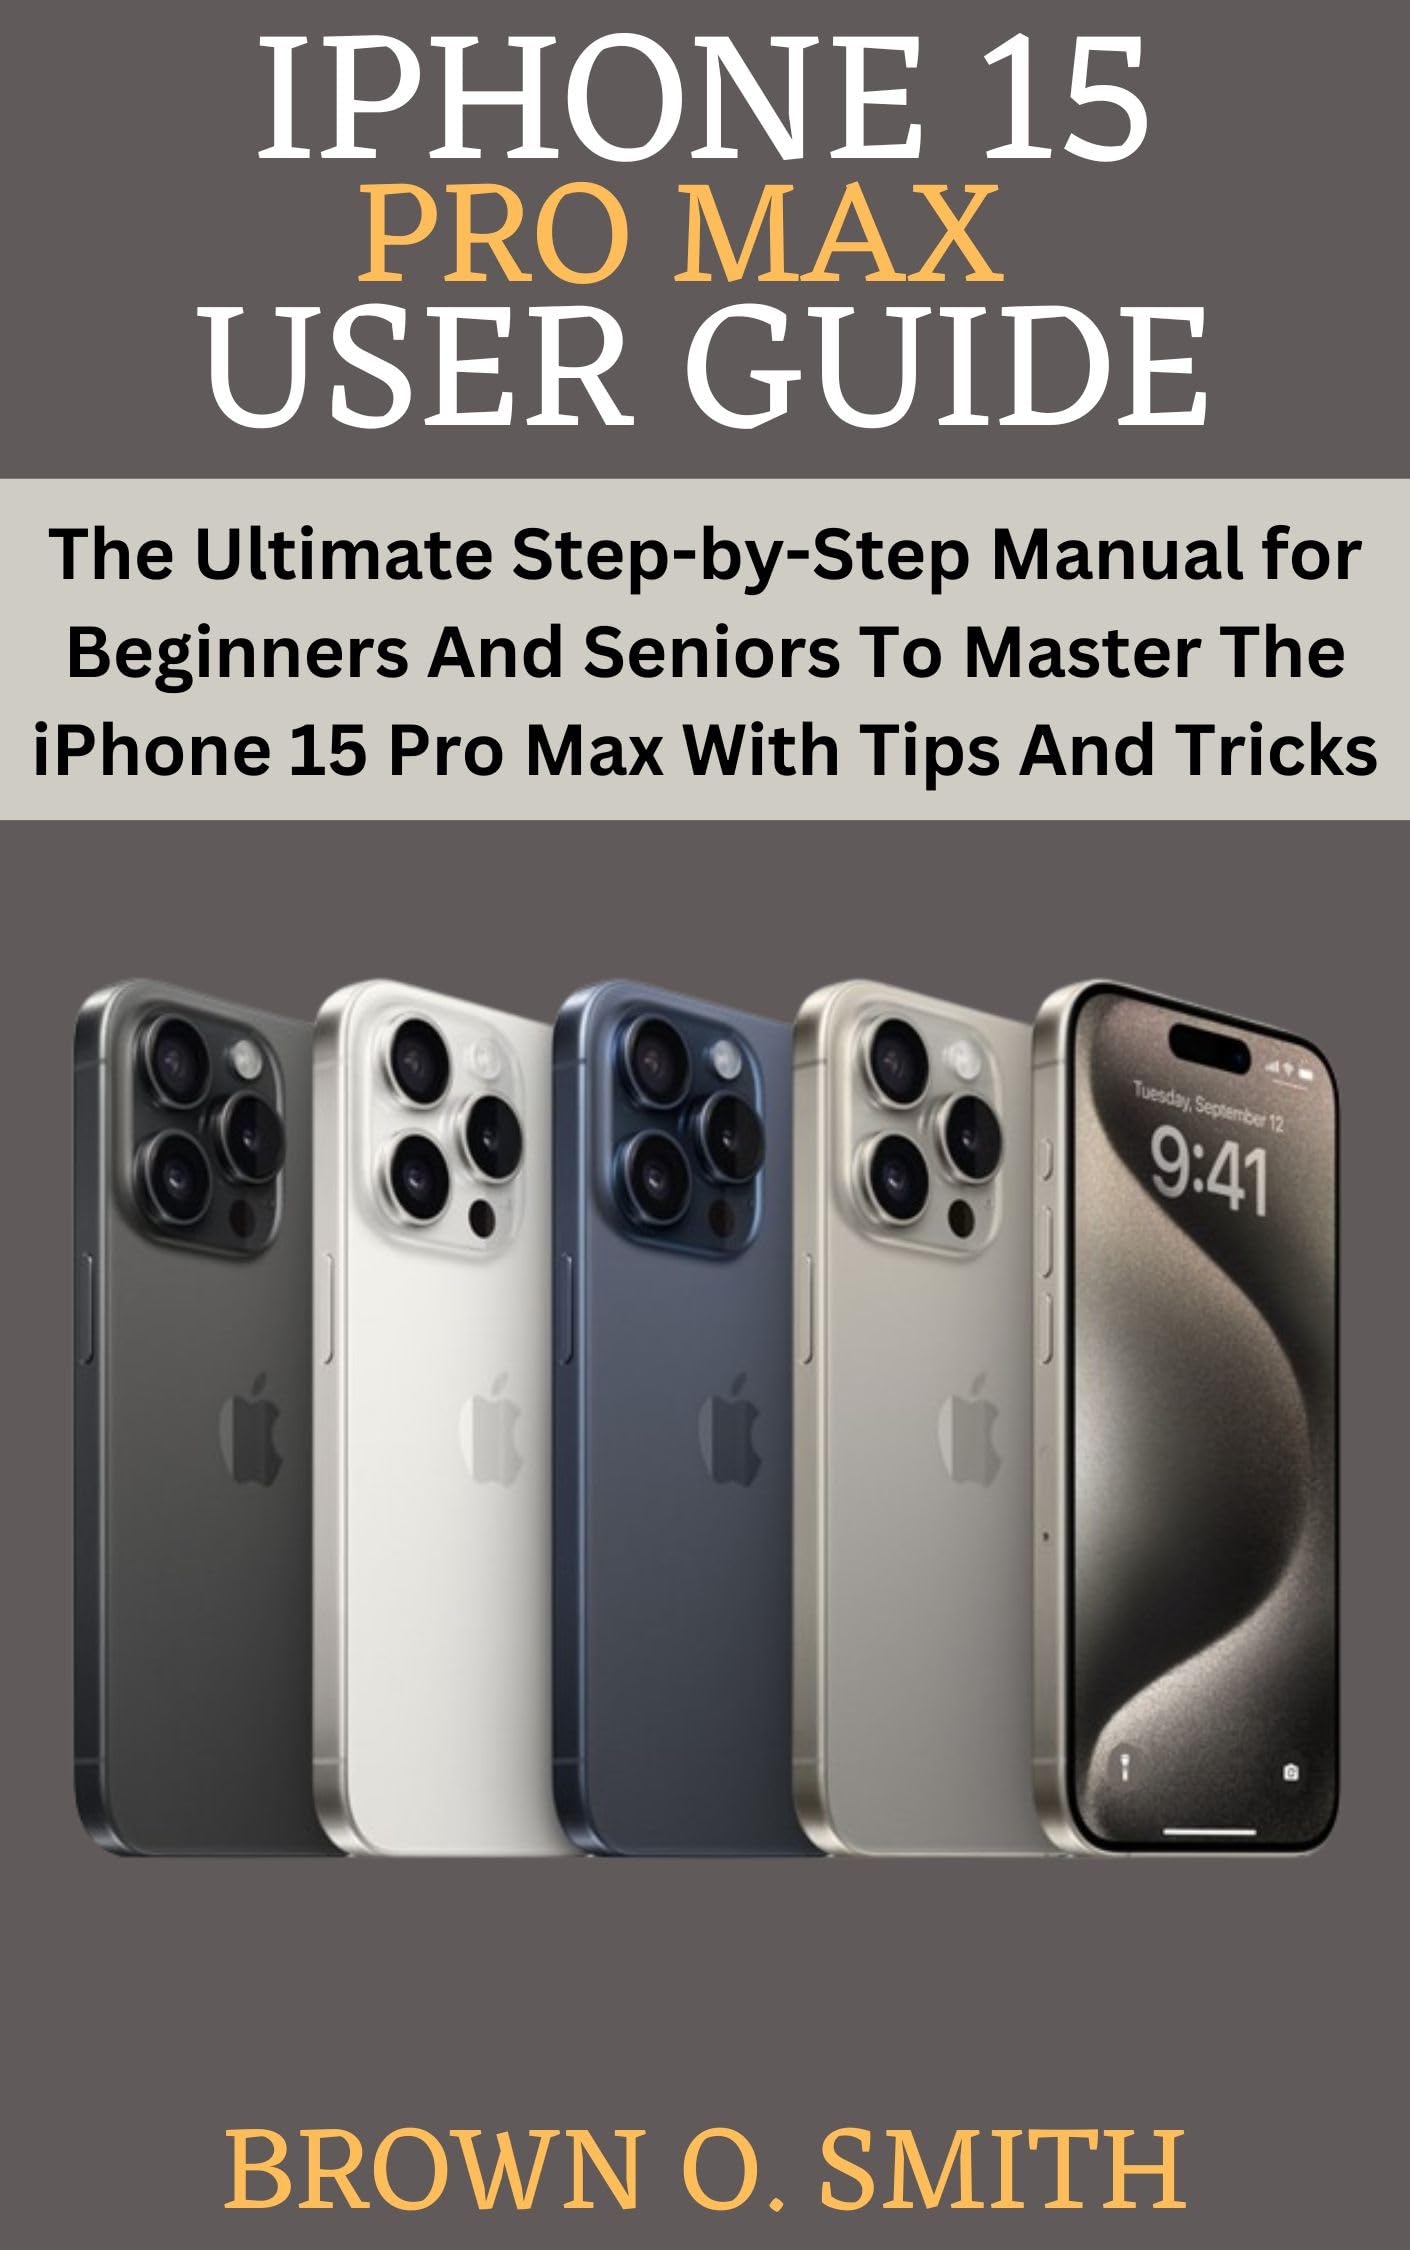 IPHONE 15 PRO MAX USER GUIDE: The Ultimate Step-by-Step Manual for Beginners And Seniors To Master The iPhone 15 Pro Max With Tips And Tricks